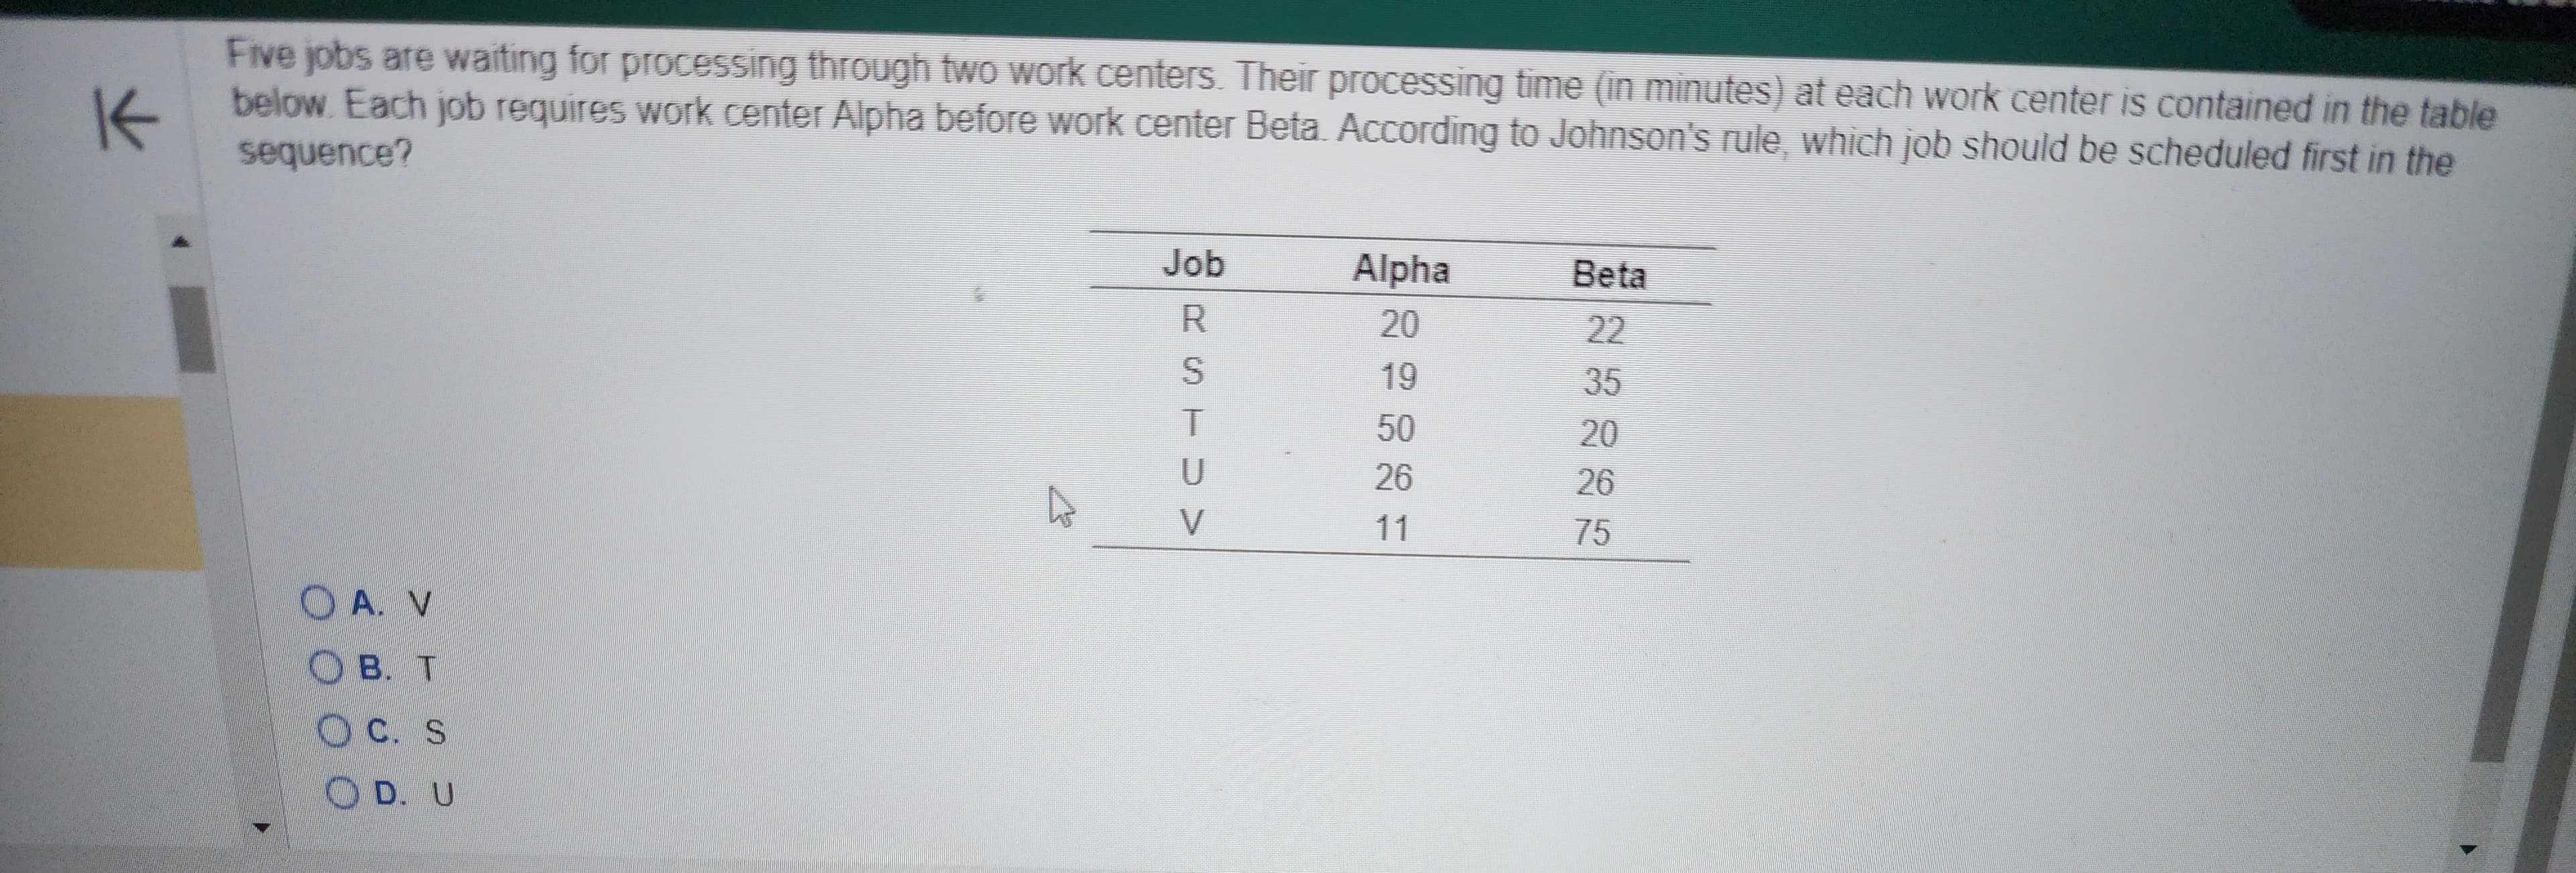 K
Five jobs are waiting for processing through two work centers. Their processing time (in minutes) at each work center is contained in the table
below. Each job requires work center Alpha before work center Beta. According to Johnson's rule, which job should be scheduled first in the
sequence?
OA. V
OB. T
OC. S
OD. U
Job
I STD>
R
D V
Alpha
20
19
50
26
11
Beta
22
35
20
26
75